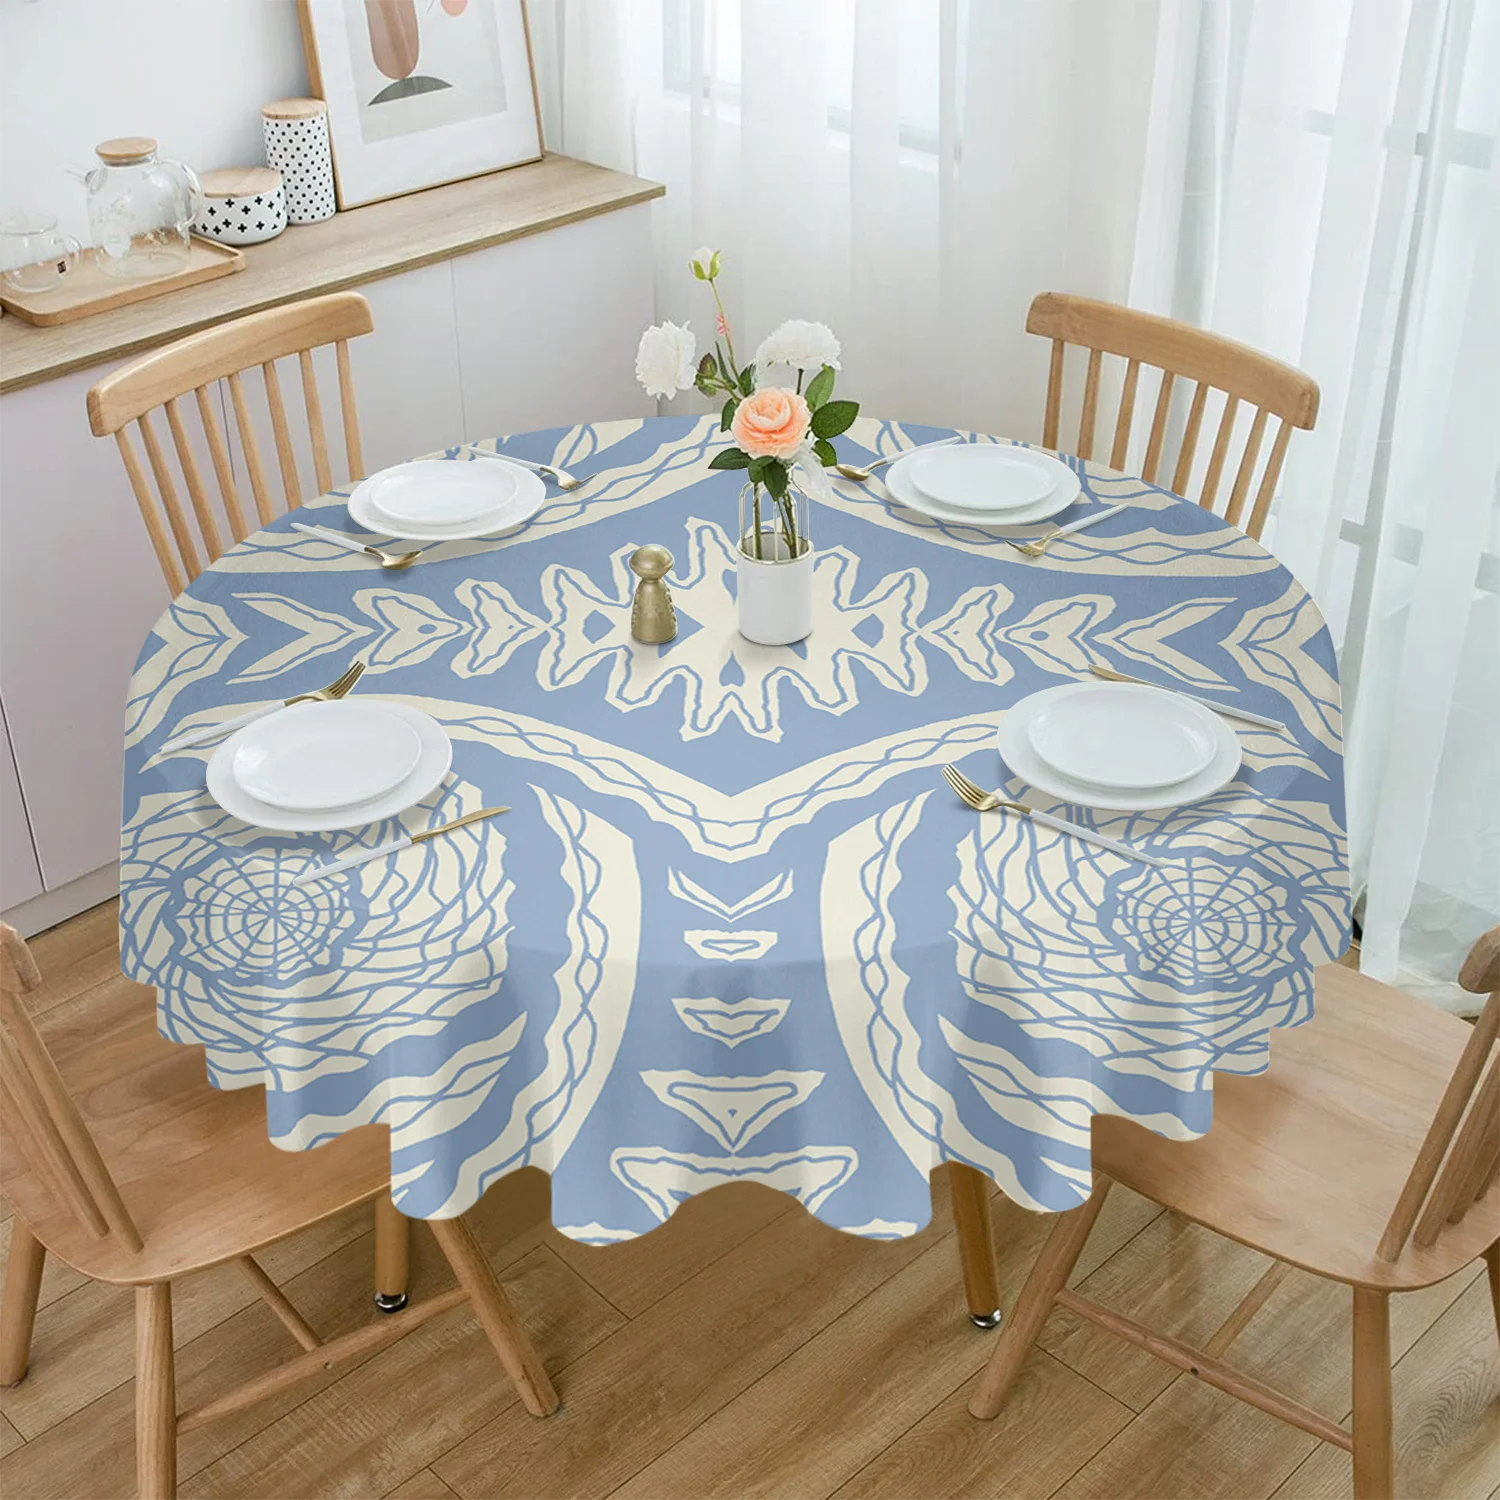 

Texture Special National Symbols Spiral Waterproof Tablecloth Wedding Home Kitchen Dining Room Table Decor Round Table Cover